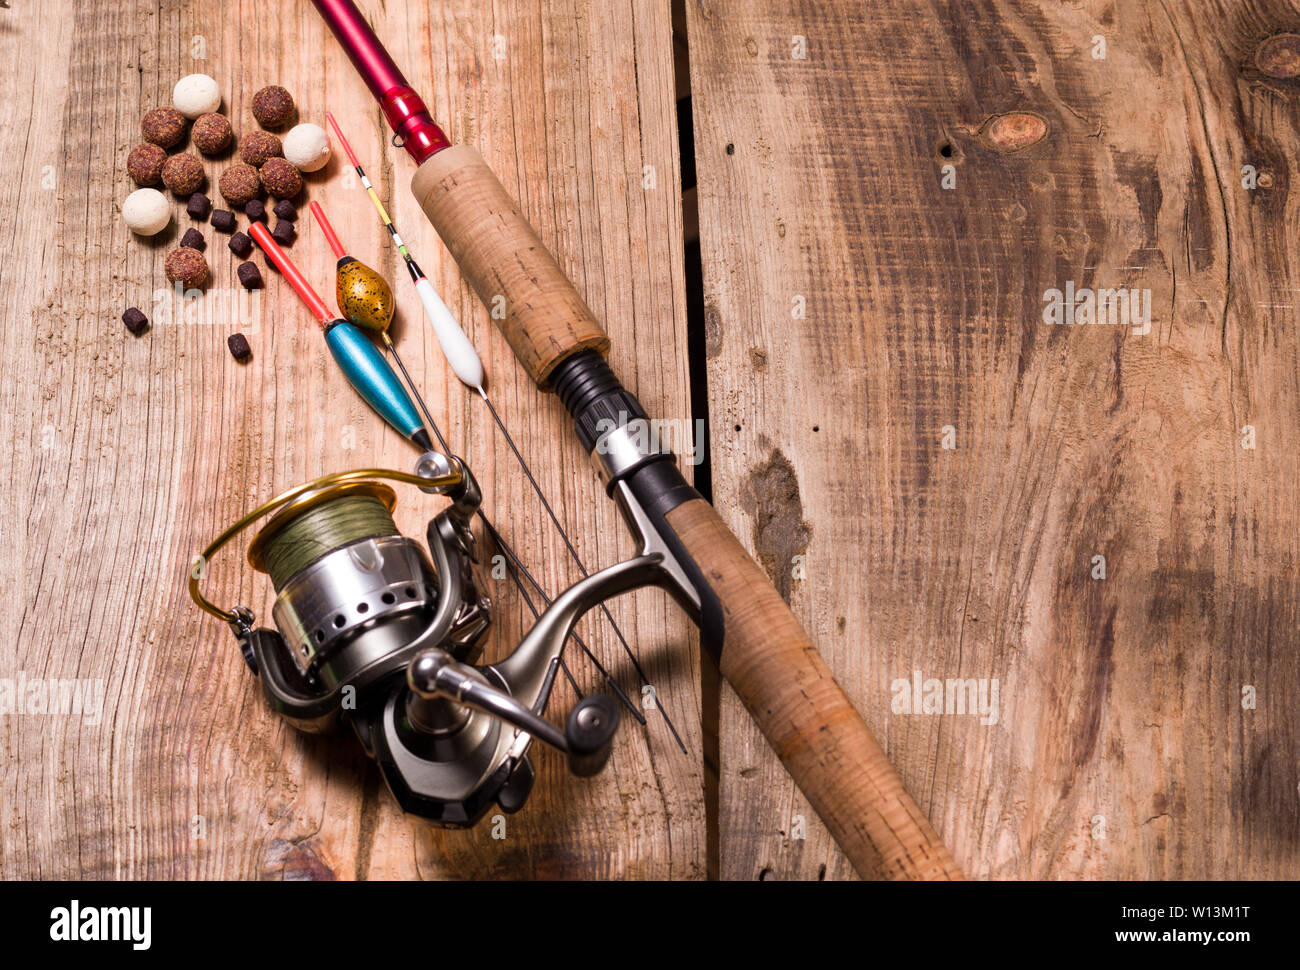 Fishing rod with reel and fishing line. Fishing floats and baits for carp.  Tackle on a wooden jetty Stock Photo - Alamy